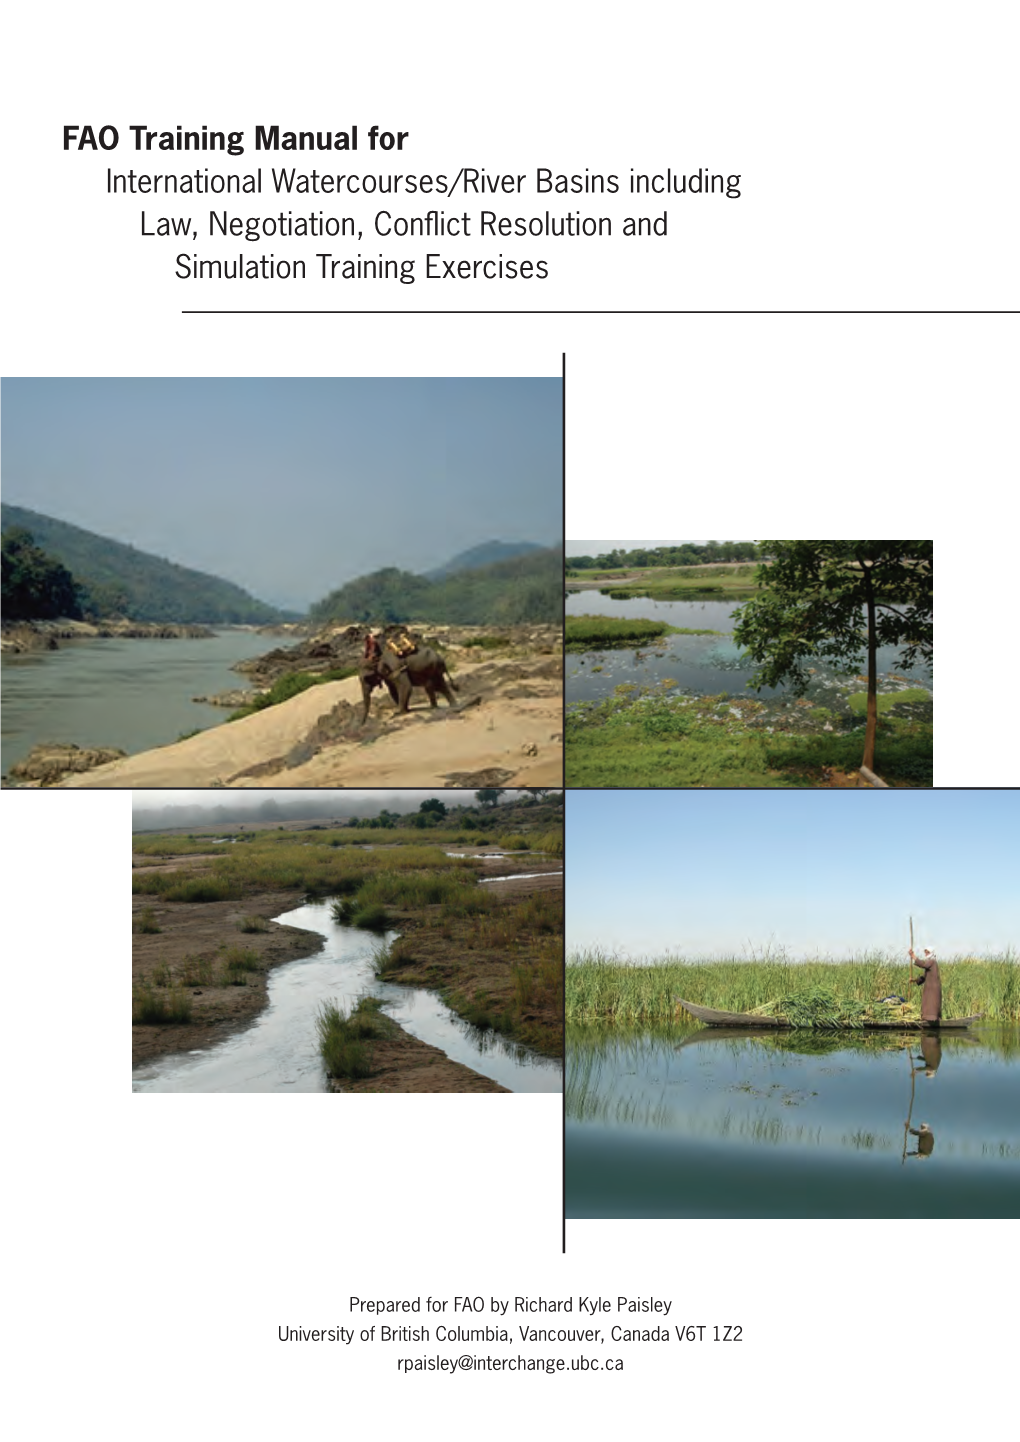 FAO Training Manual for International Watercourses/River Basins Including Law, Negotiation, Conflict Resolution and Simulation Training Exercises